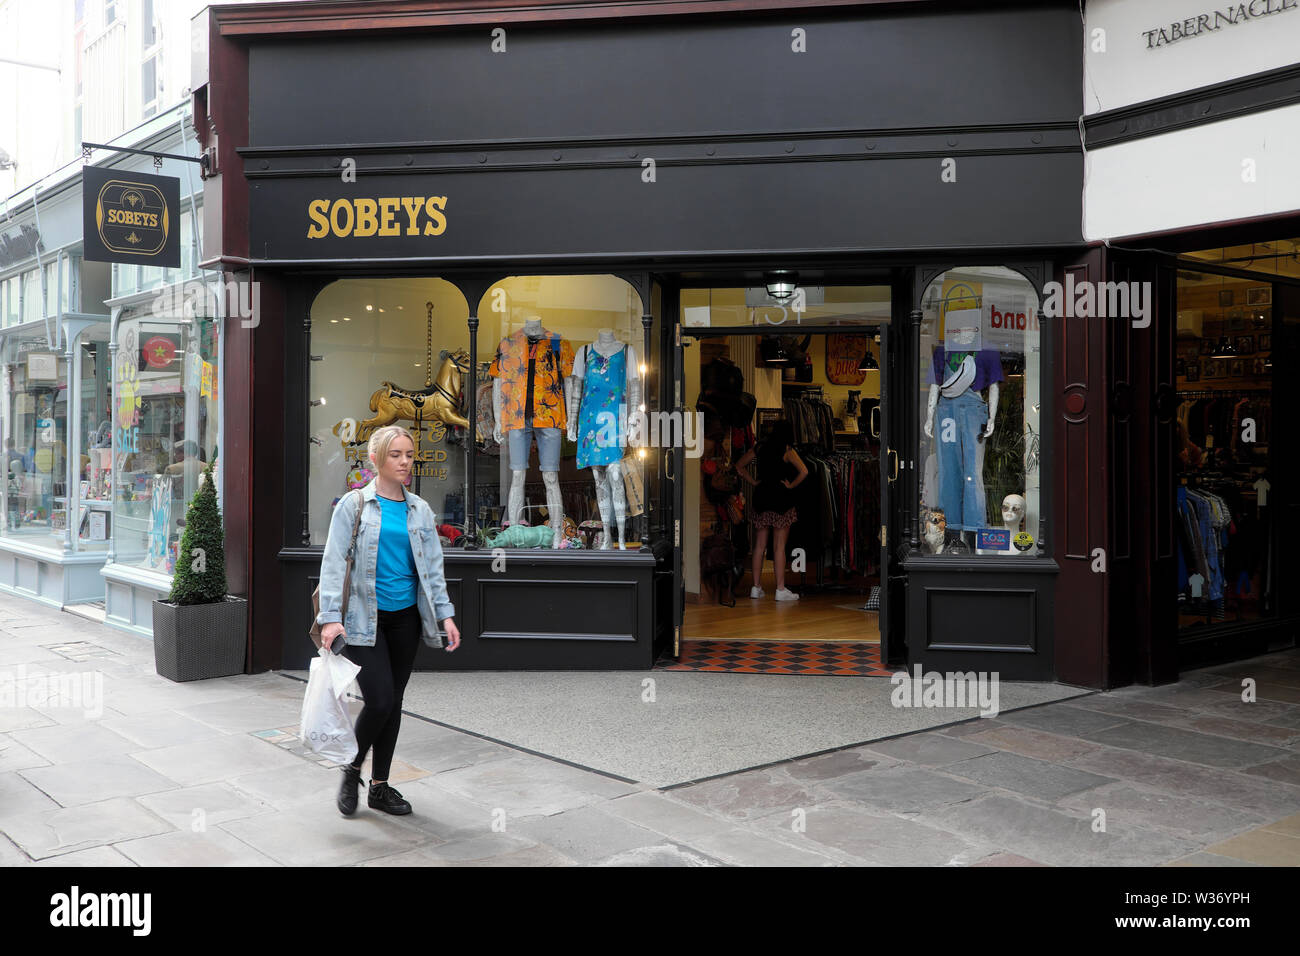 Exterior view of young woman walking past the entrance to Sobeys vintage clothing store in Royal Arcade Cardiff Wales UK  KATHY DEWITT Stock Photo